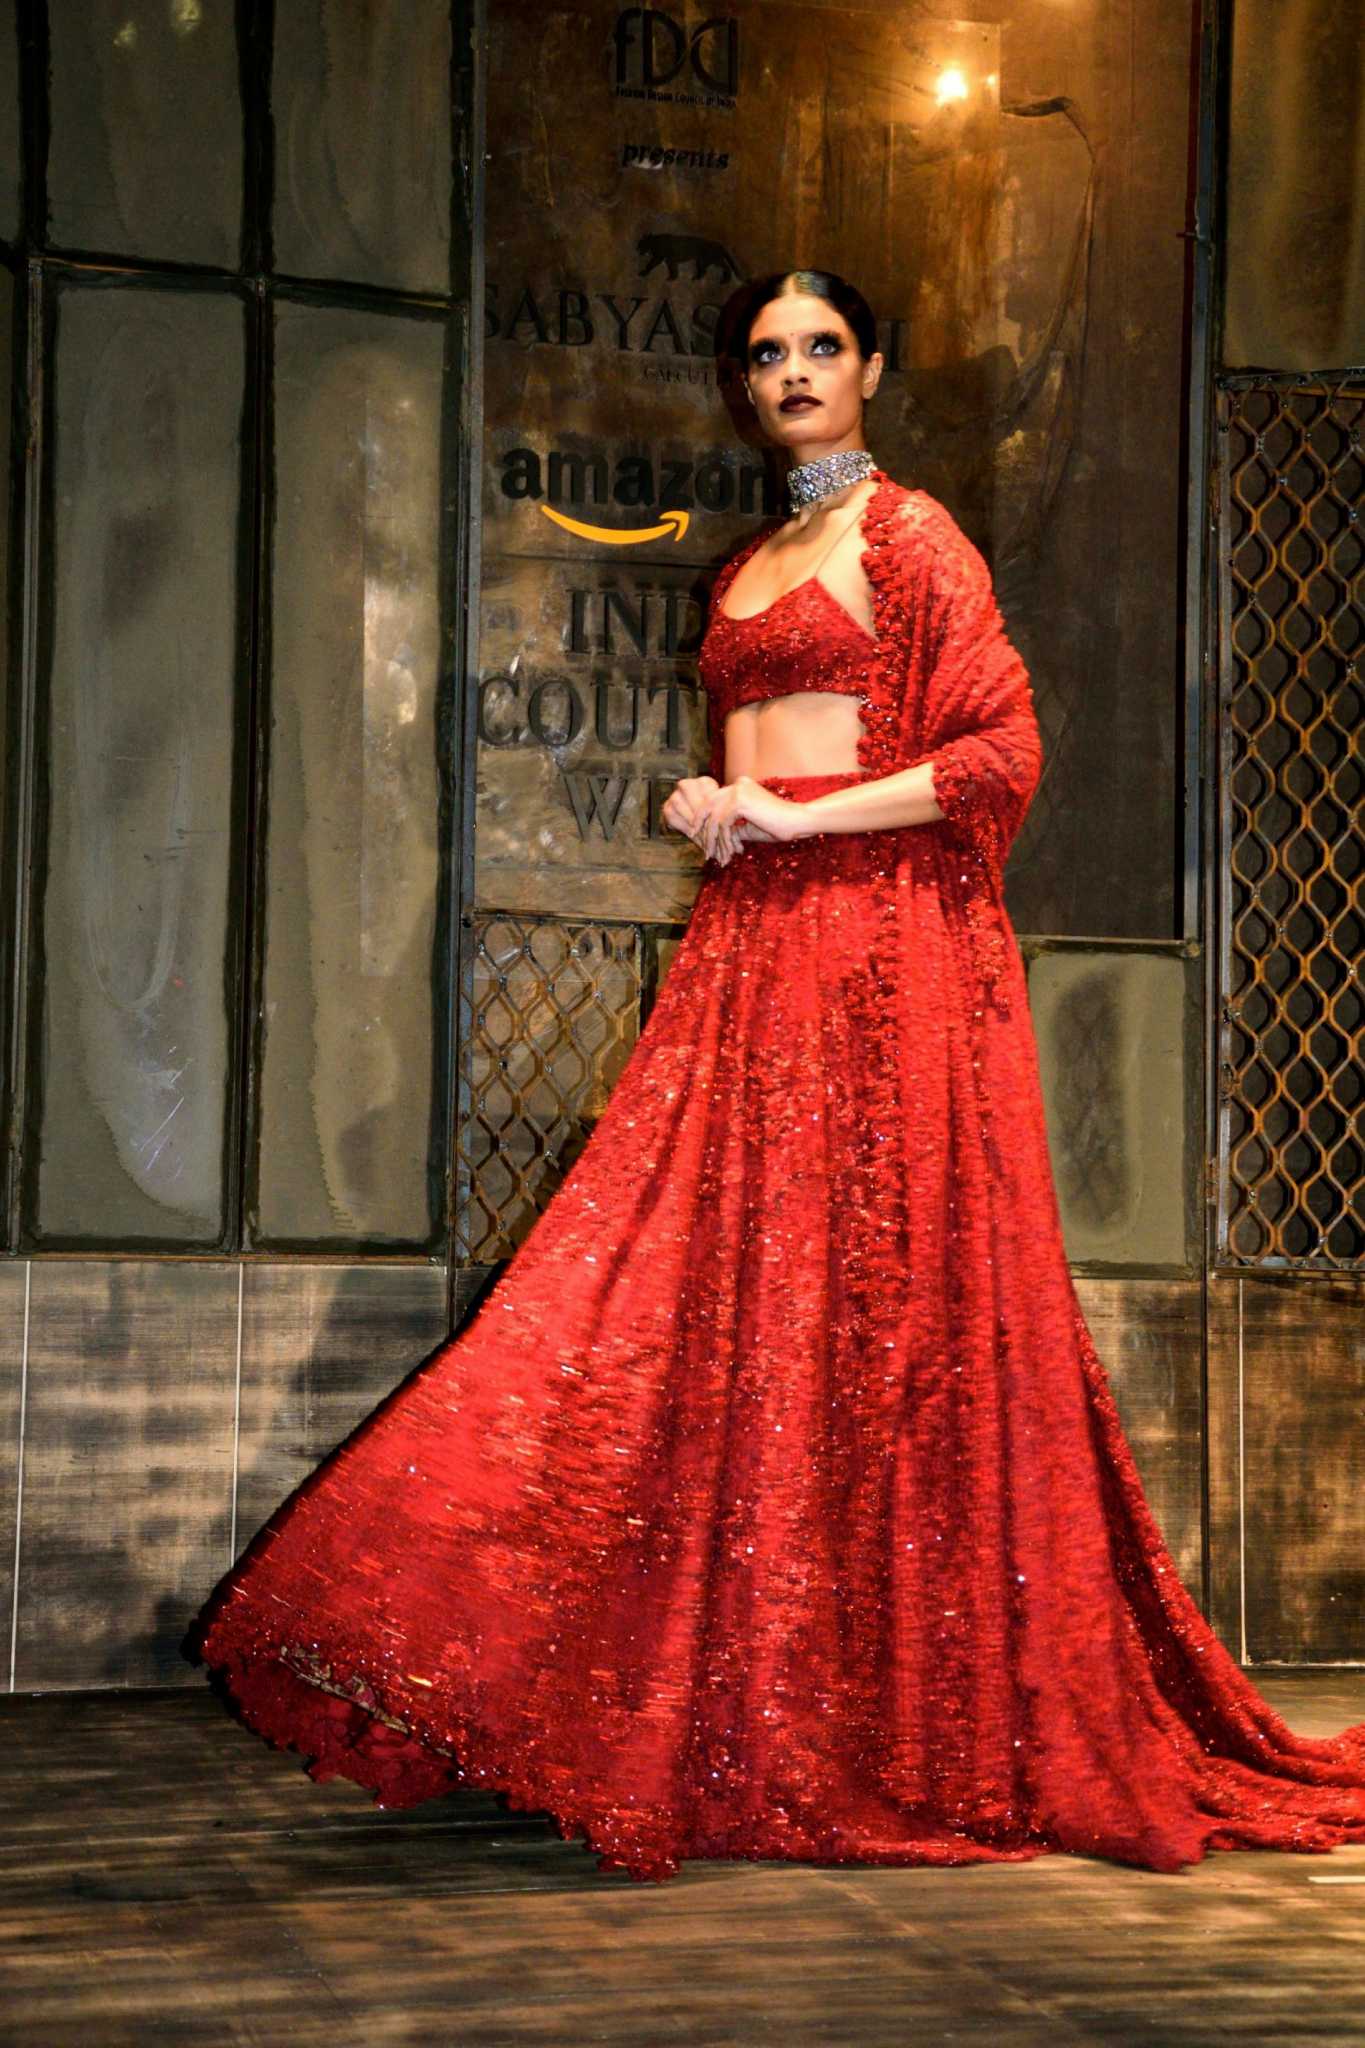 Jaw-dropping dresses from India Couture Week 2015 - Houston Chronicle